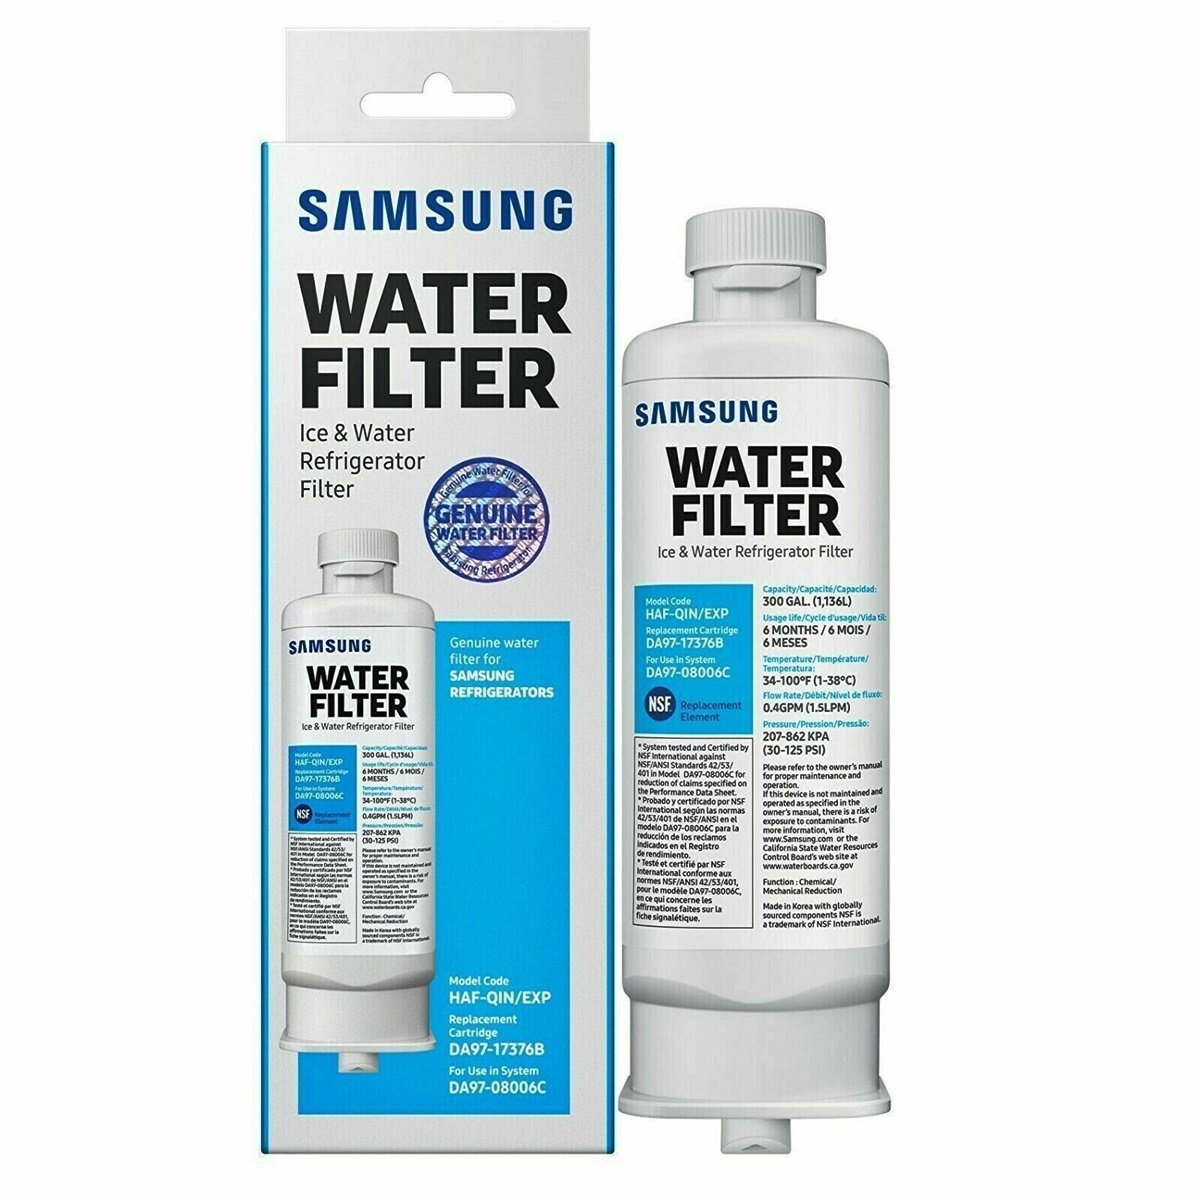 Where Can I Buy A Samsung Water Filter